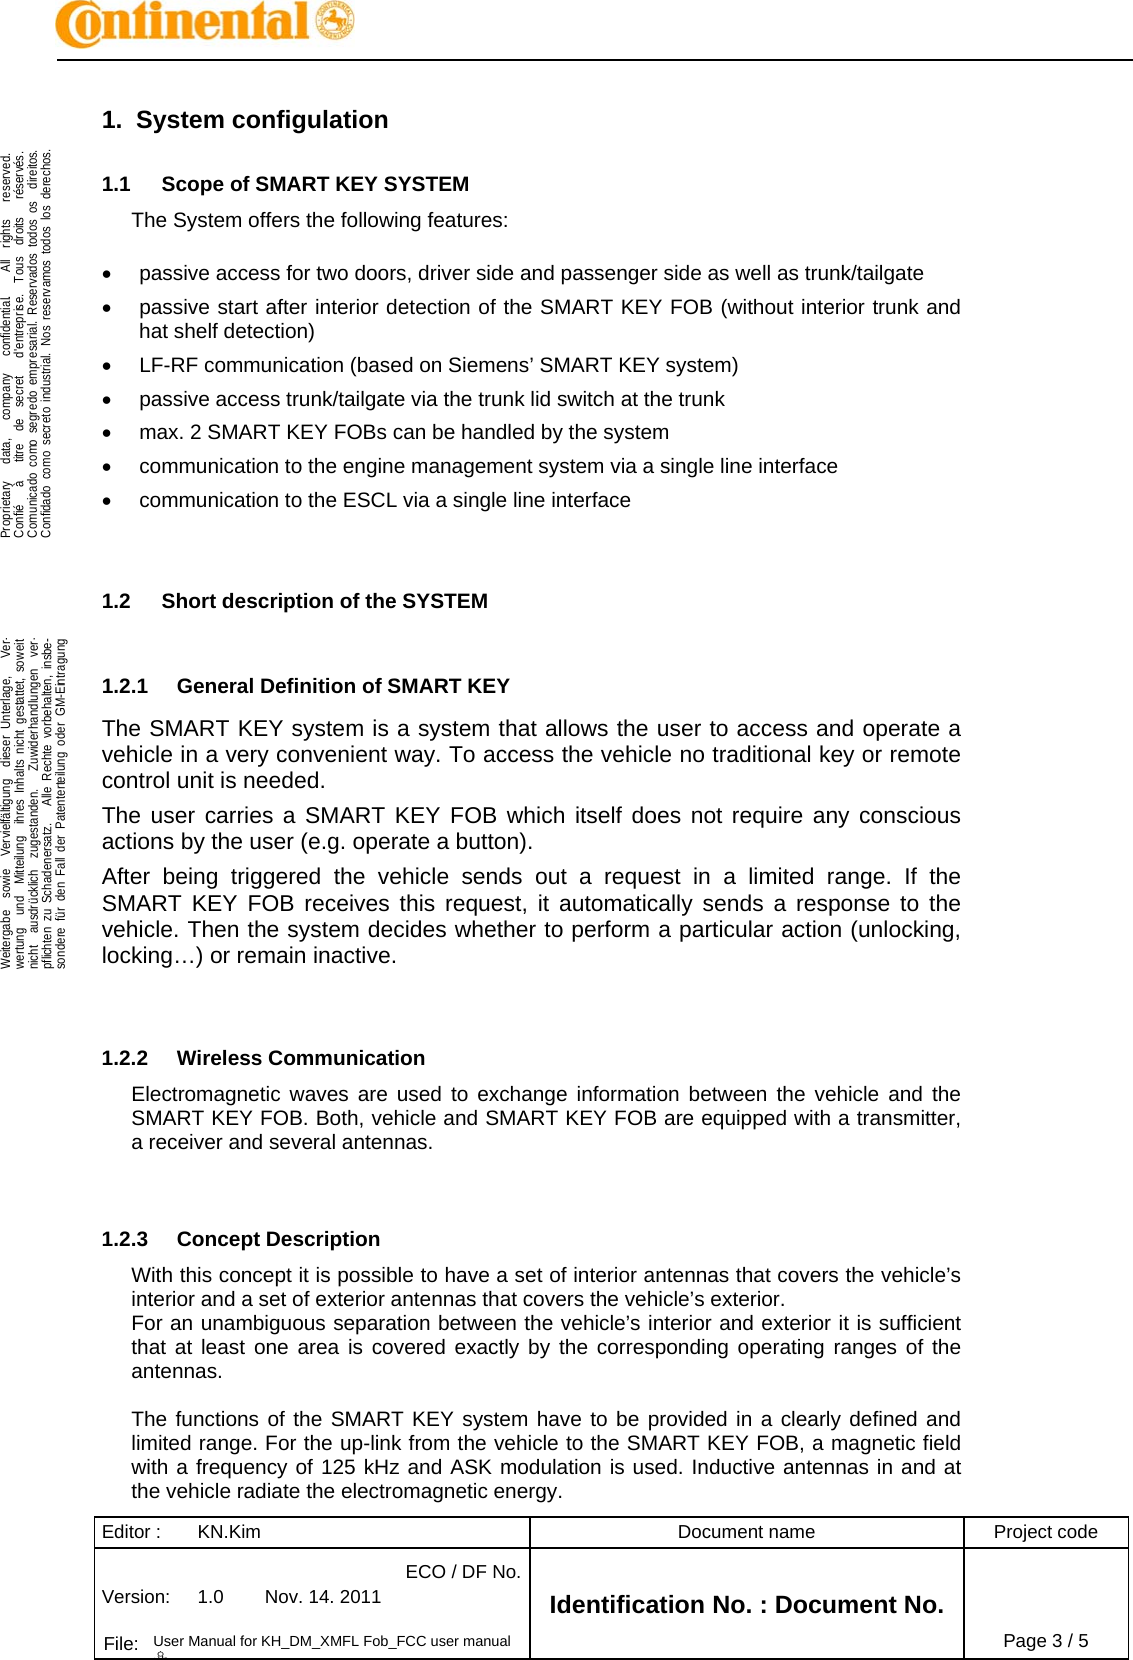 Editor :  KN.Kim  Document name  Project code Version:  1.0  Nov. 14. 2011 ECO / DF No.Identification No. : Document No.   File:  User Manual for KH_DM_XMFL Fob_FCC user manual 용Page 3 / 5    .Proprietary   data,   company   confidential.    All  rights   reserved.Confié   à   titre  de  secret   d&apos;entreprise.  Tous  droits   réservés.Comunicado como segredo empresarial. Reservados todos os  direitos.Confidado como secreto industrial. Nos reservamos todos los derechos.  .Weitergabe  sowie  Vervielfältigung  dieser Unterlage,   Ver-wertung  und  Mitteilung  ihres Inhalts nicht gestattet, soweitnicht  ausdrücklich  zugestanden.   Zuwiderhandlungen  ver-pflichten zu Schadenersatz.   Alle Rechte vorbehalten, insbe-sondere für den Fall der Patenterteilung oder GM-Eintragung  1. System configulation 1.1  Scope of SMART KEY SYSTEM The System offers the following features:    passive access for two doors, driver side and passenger side as well as trunk/tailgate   passive start after interior detection of the SMART KEY FOB (without interior trunk and hat shelf detection)   LF-RF communication (based on Siemens’ SMART KEY system)   passive access trunk/tailgate via the trunk lid switch at the trunk   max. 2 SMART KEY FOBs can be handled by the system   communication to the engine management system via a single line interface   communication to the ESCL via a single line interface   1.2  Short description of the SYSTEM  1.2.1  General Definition of SMART KEY The SMART KEY system is a system that allows the user to access and operate a vehicle in a very convenient way. To access the vehicle no traditional key or remote control unit is needed.  The user carries a SMART KEY FOB which itself does not require any conscious actions by the user (e.g. operate a button).  After being triggered the vehicle sends out a request in a limited range. If the SMART KEY FOB receives this request, it automatically sends a response to the vehicle. Then the system decides whether to perform a particular action (unlocking, locking…) or remain inactive.   1.2.2 Wireless Communication Electromagnetic waves are used to exchange information between the vehicle and the SMART KEY FOB. Both, vehicle and SMART KEY FOB are equipped with a transmitter, a receiver and several antennas.    1.2.3 Concept Description With this concept it is possible to have a set of interior antennas that covers the vehicle’s interior and a set of exterior antennas that covers the vehicle’s exterior. For an unambiguous separation between the vehicle’s interior and exterior it is sufficient that at least one area is covered exactly by the corresponding operating ranges of the antennas.  The functions of the SMART KEY system have to be provided in a clearly defined and limited range. For the up-link from the vehicle to the SMART KEY FOB, a magnetic field with a frequency of 125 kHz and ASK modulation is used. Inductive antennas in and at the vehicle radiate the electromagnetic energy. 